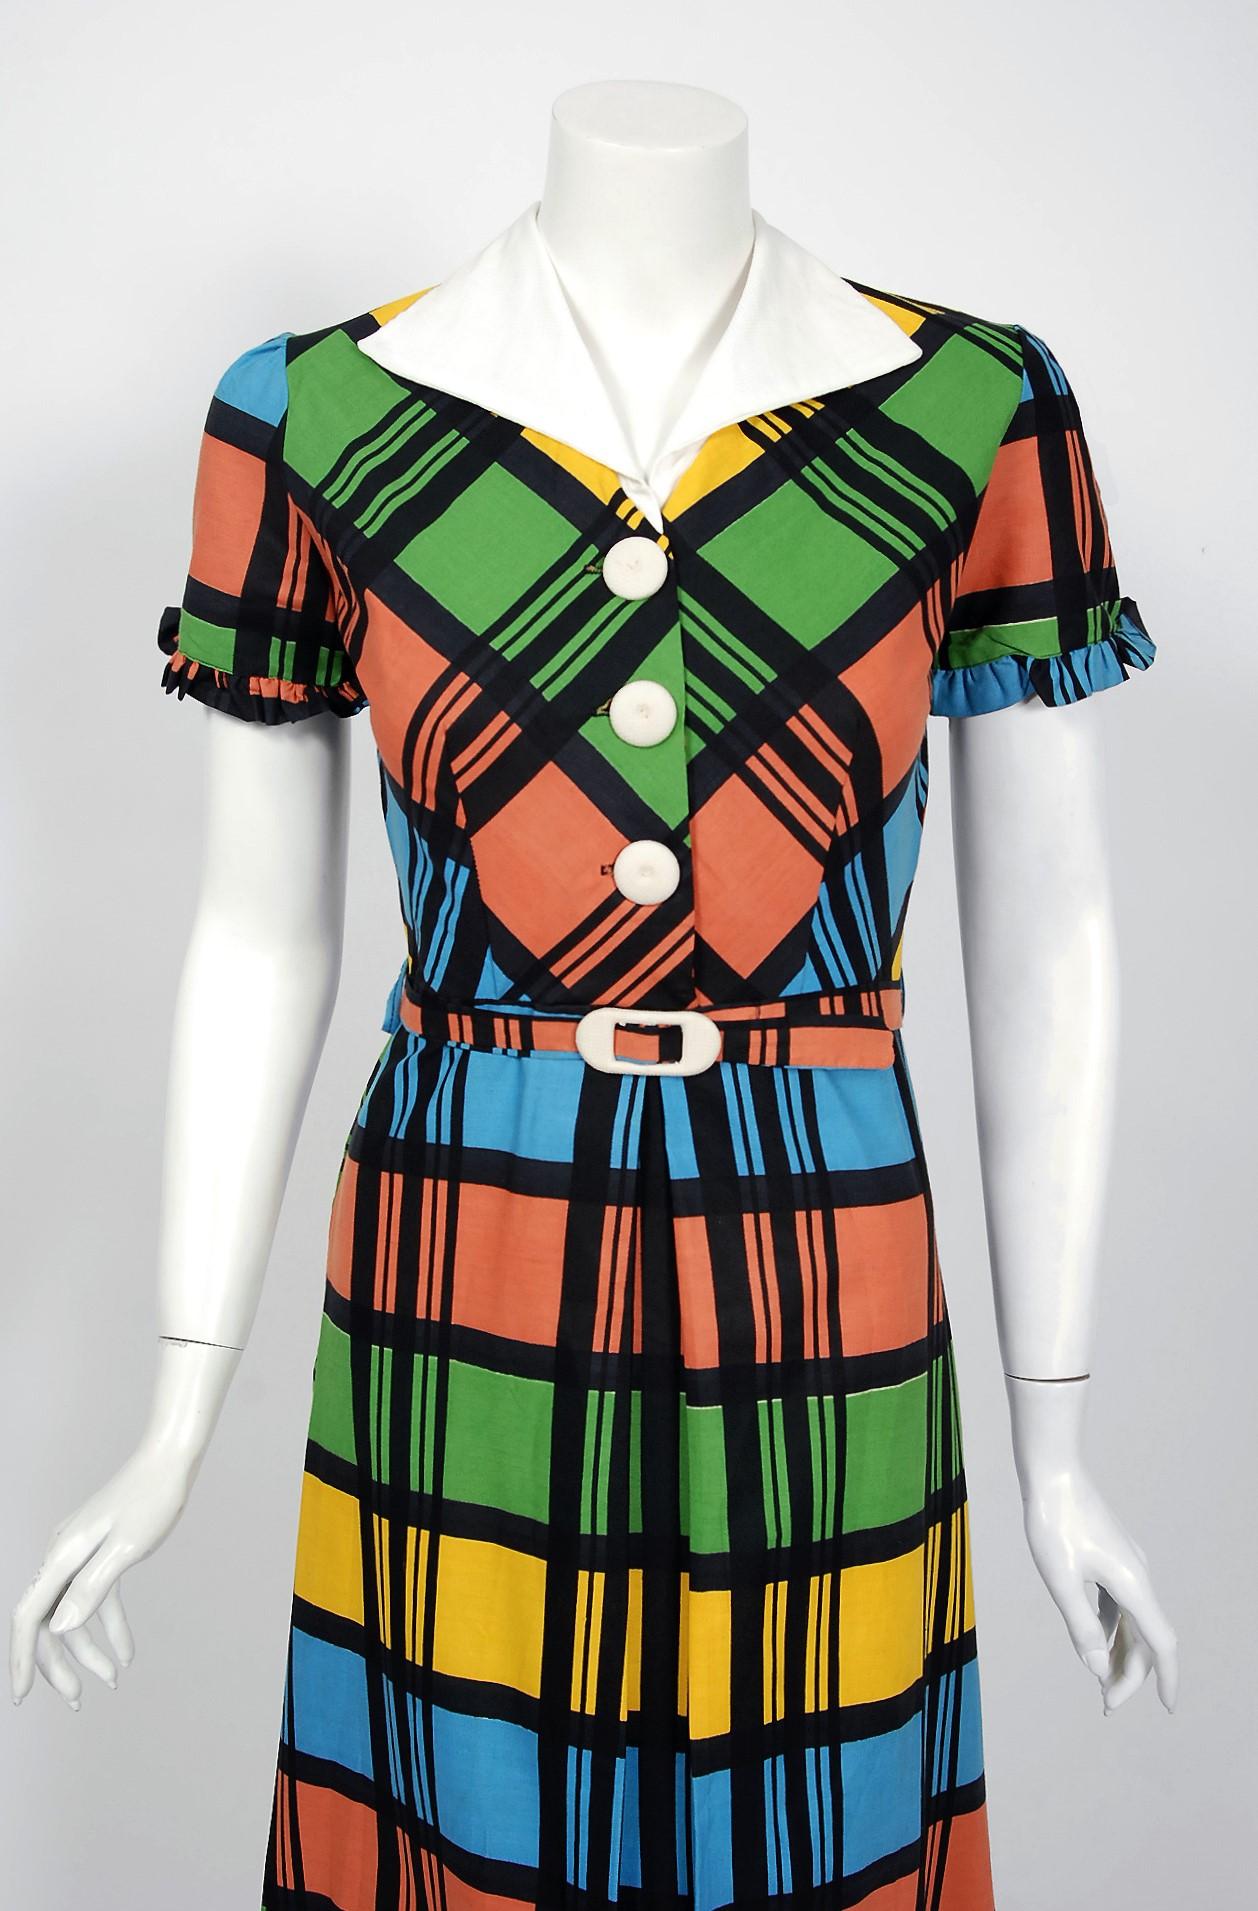 With its vibrant rainbow plaid print and flawless styling, this 